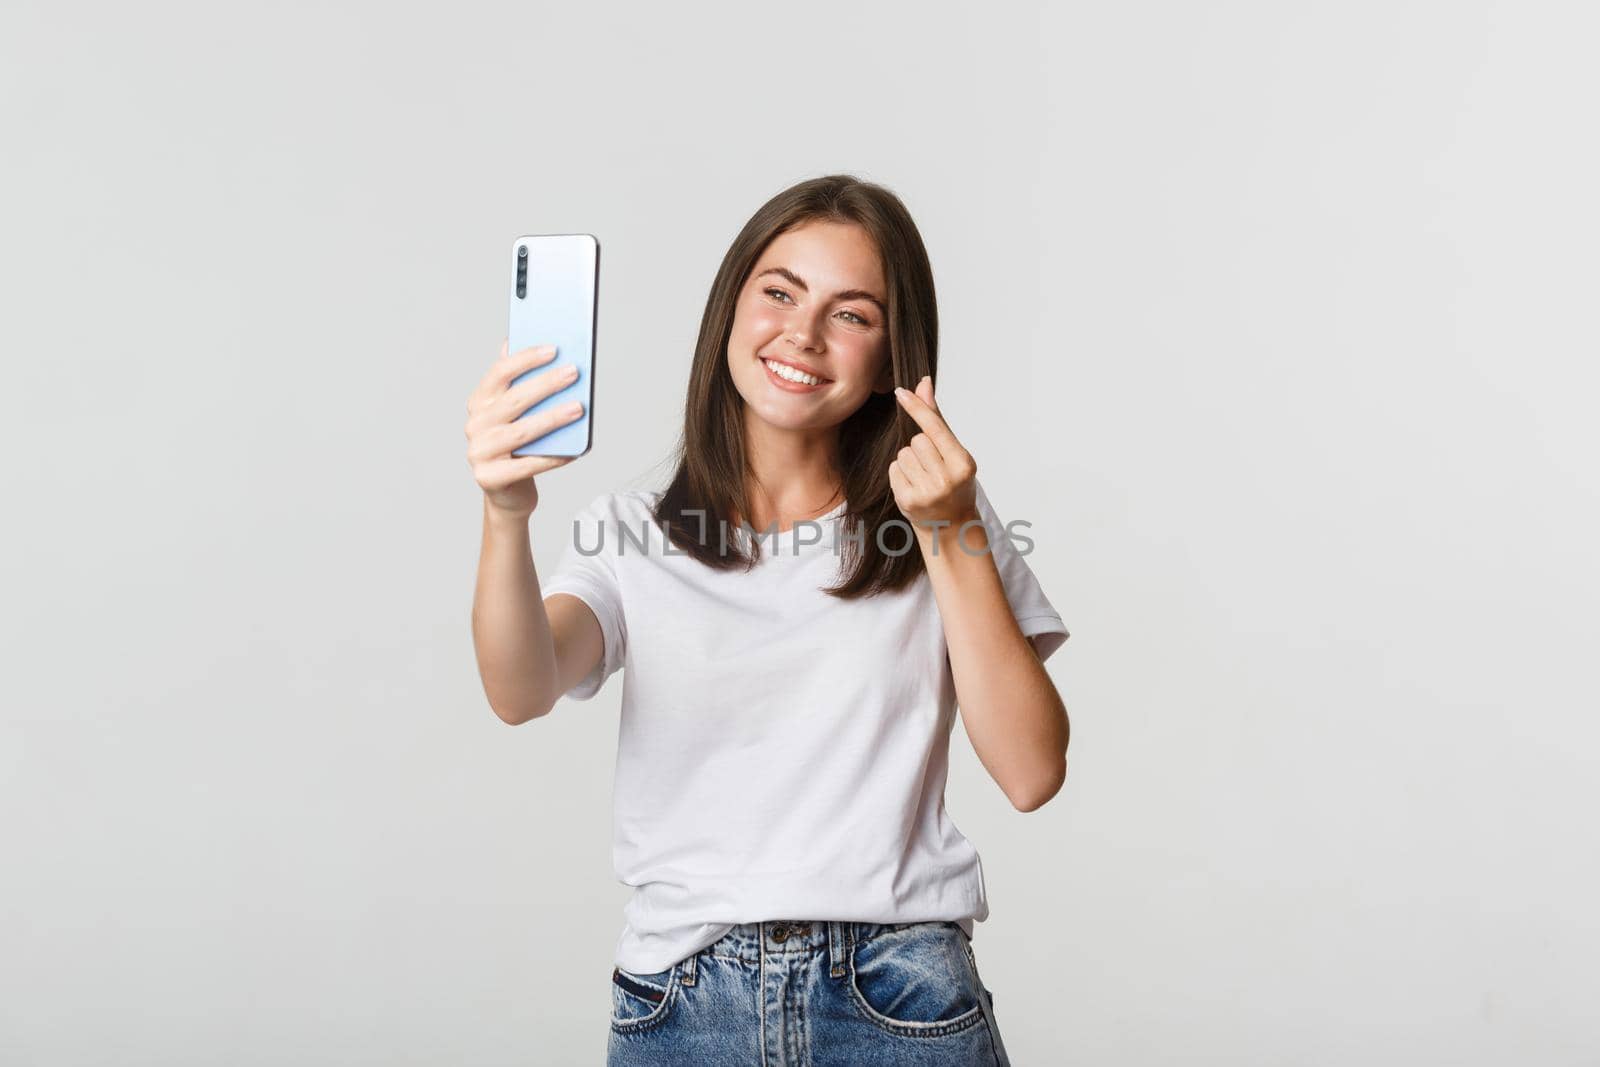 Happy beautiful young woman showing heart gesture and taking selfie on smartphone and smiling.